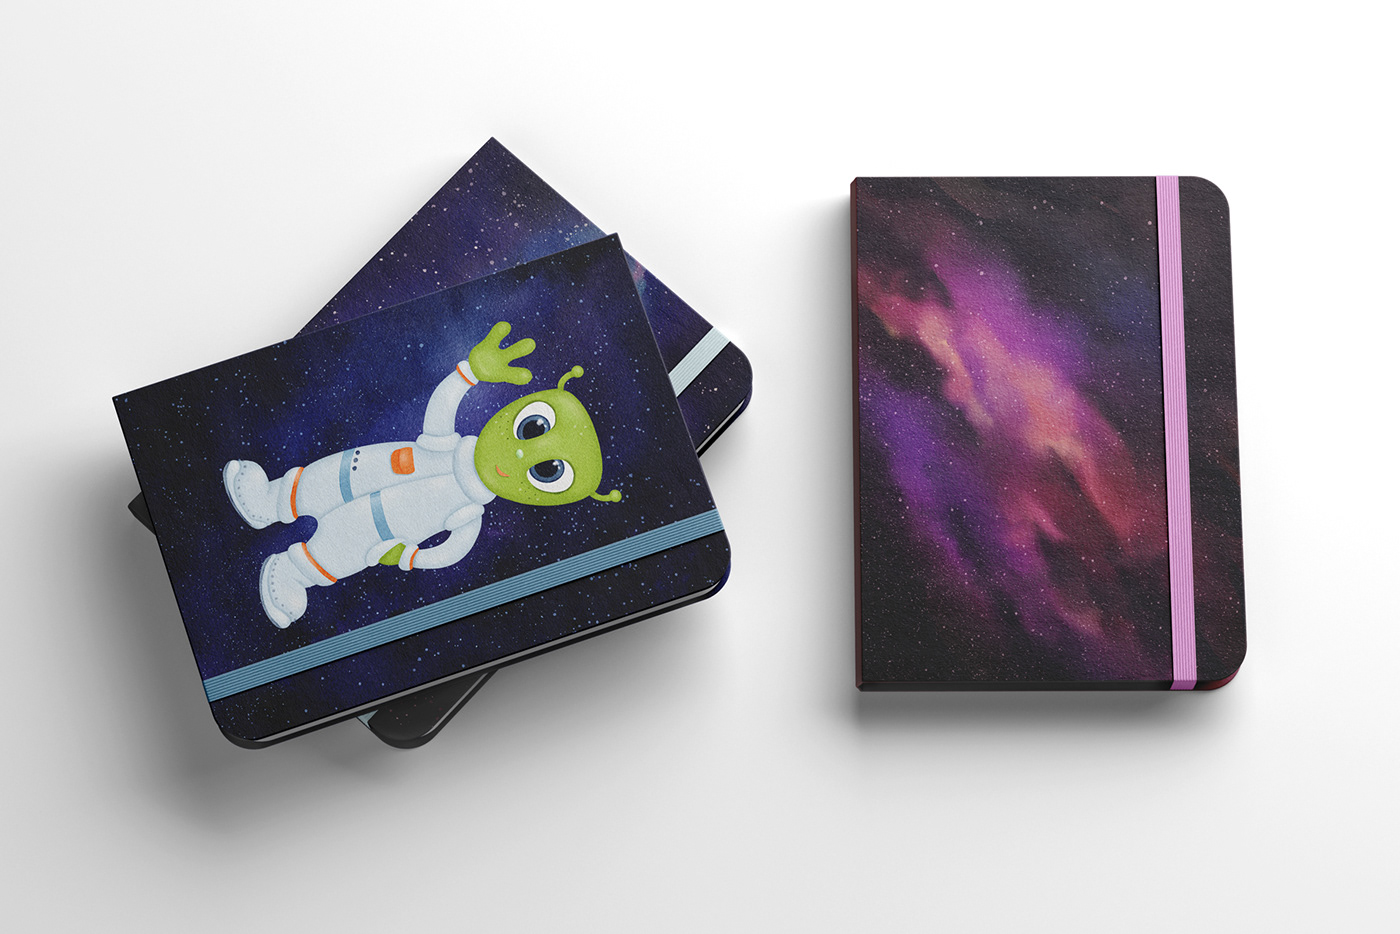 Notebooks with various covers: night sky backgrounds, aliens